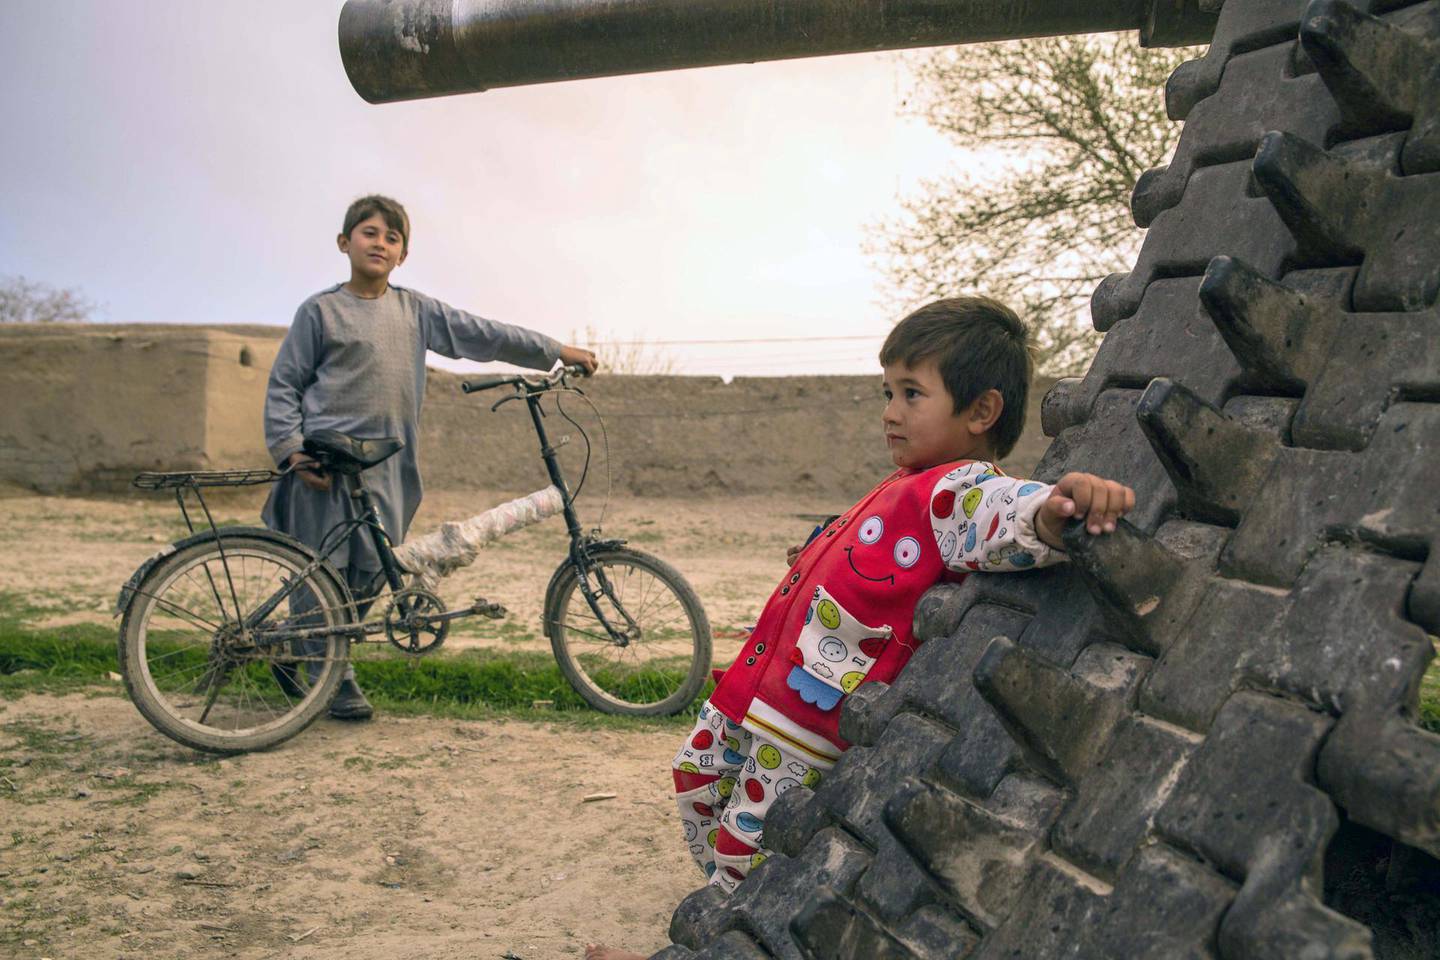 In Kandahar, where playgrounds are largely unavailable, children play on an old Soviet tank. Conflict is all-present in the southern province and eighteen years of American invasion haven't defeated the Taliban. Photo by Stefanie Glinski